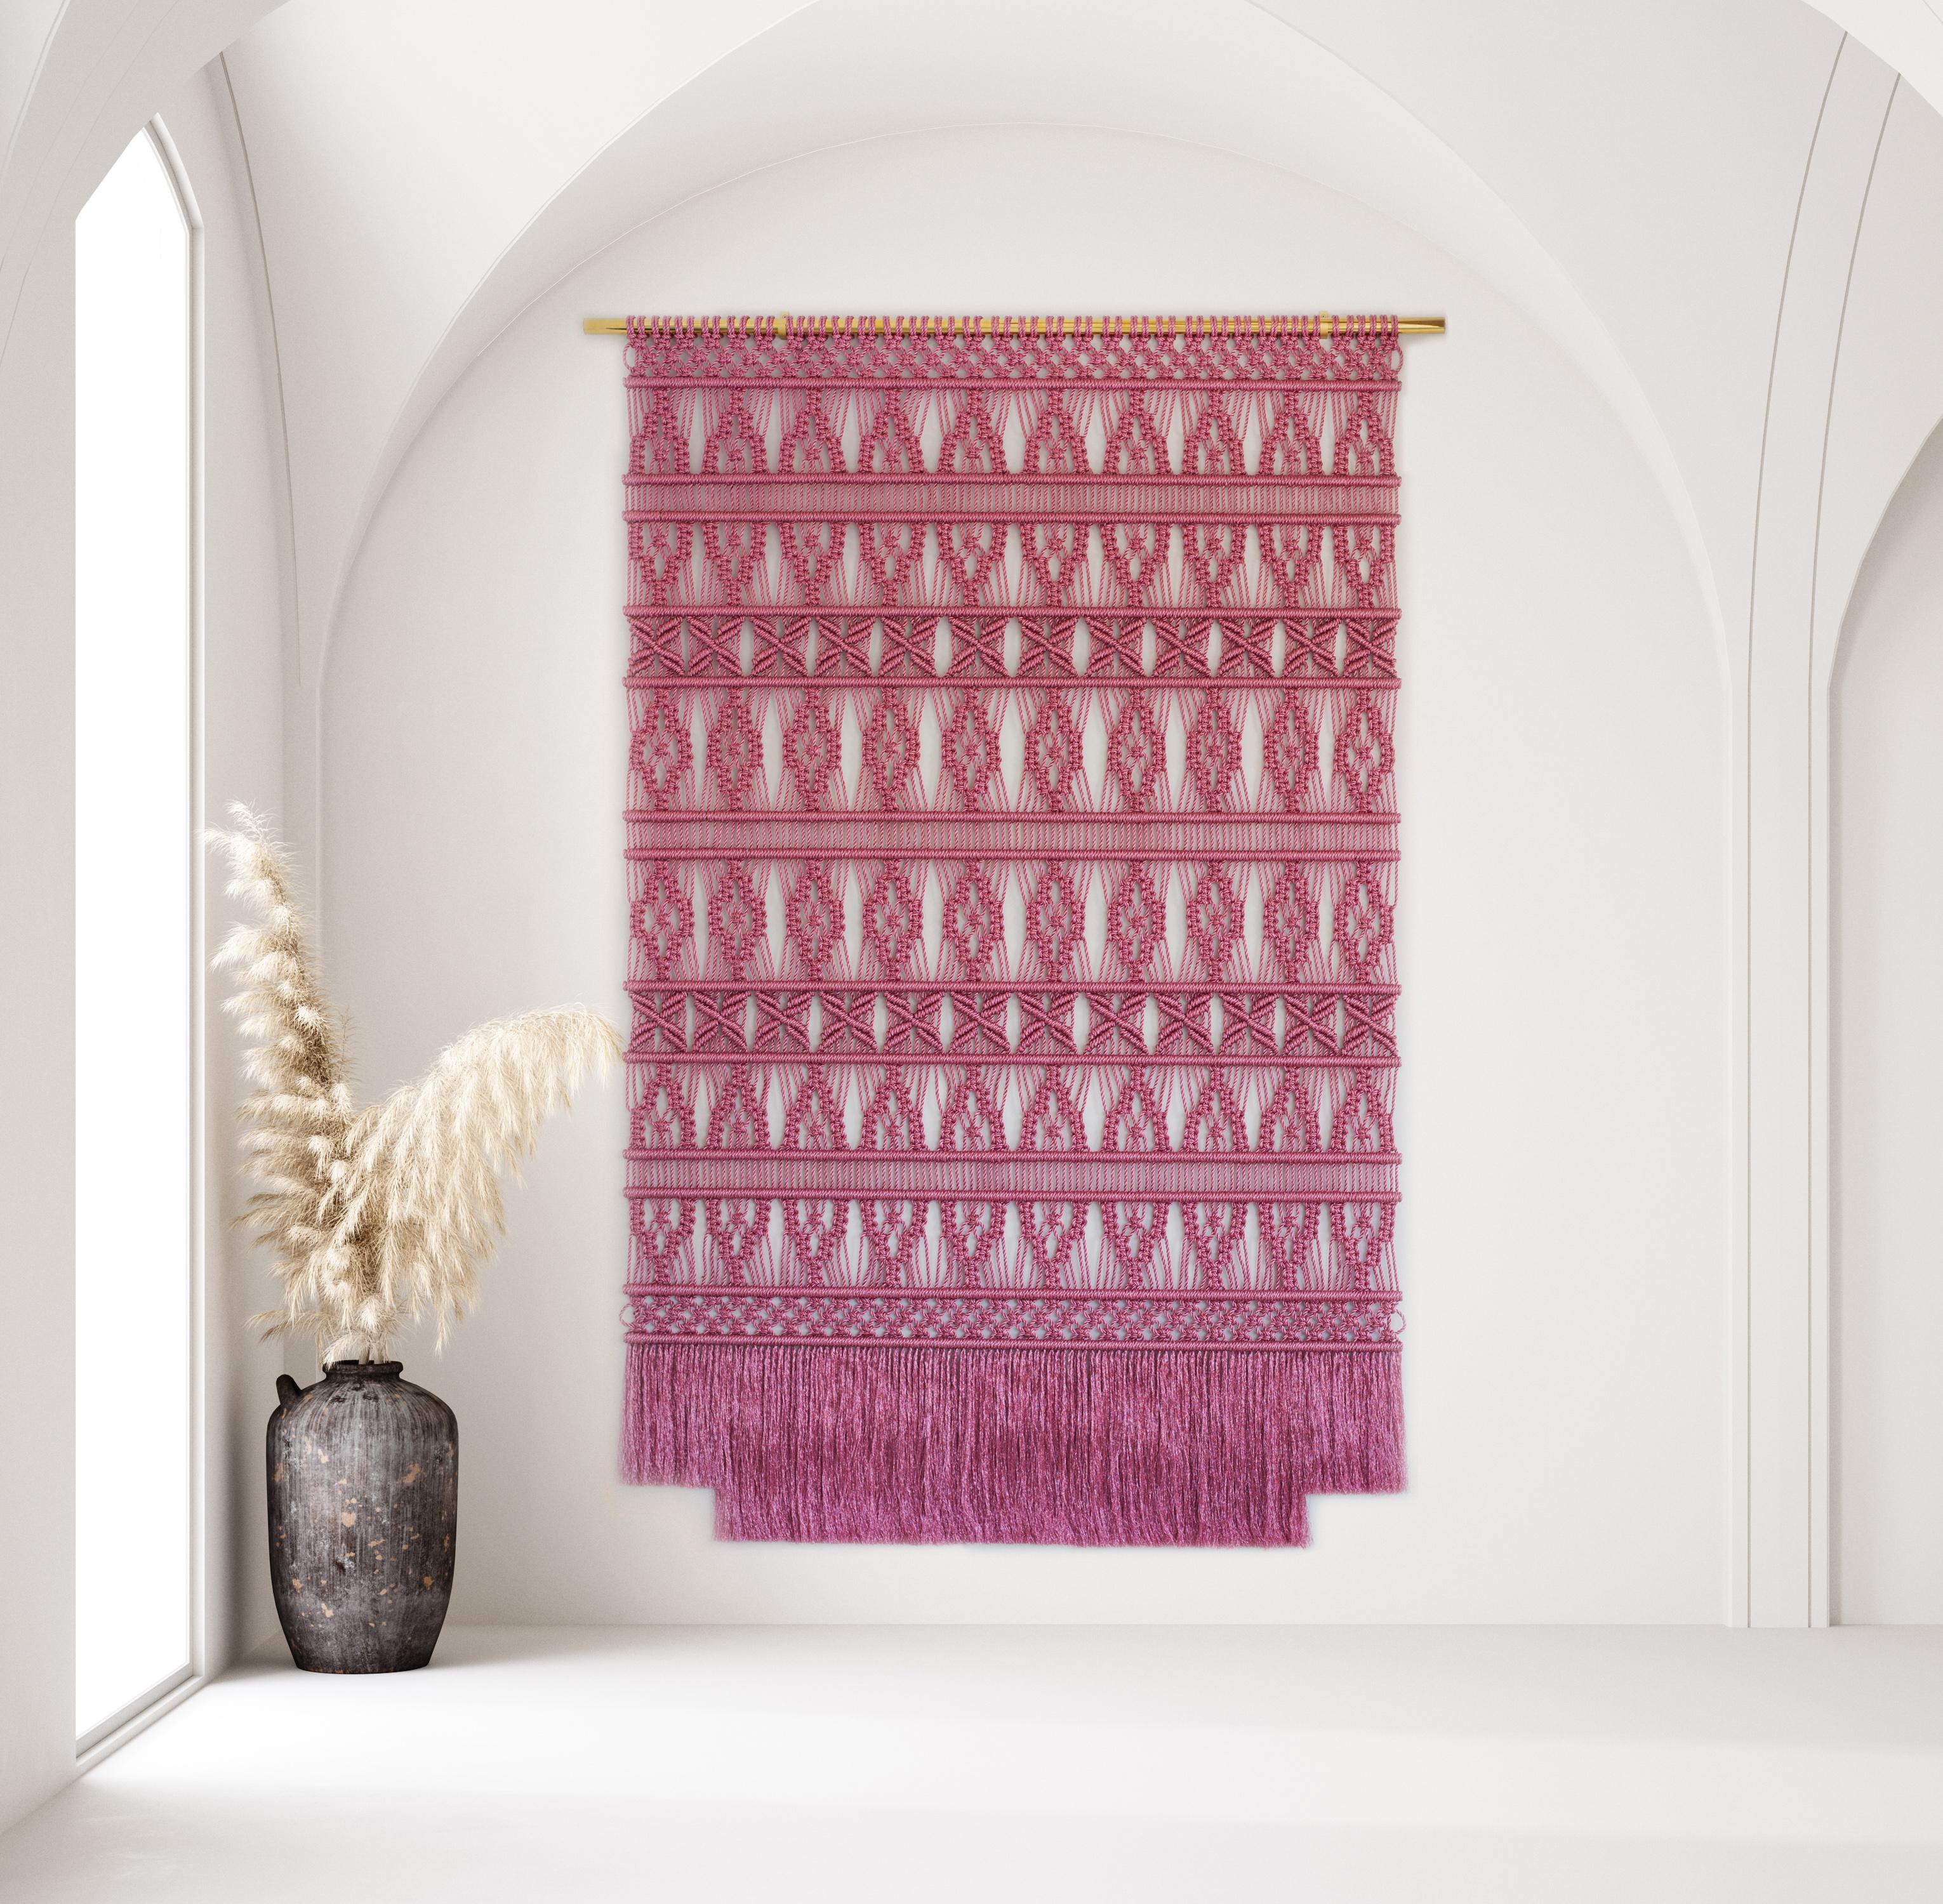 Pink metallic macrame wallhanging
wallart, fiberart, textile art, wall tapestry
Measures: 180cm x 280cm
Handmade by Milla. Novo in her Art studio near Amsterdam
These large wallhangings give a warm feeling in your interior and help with